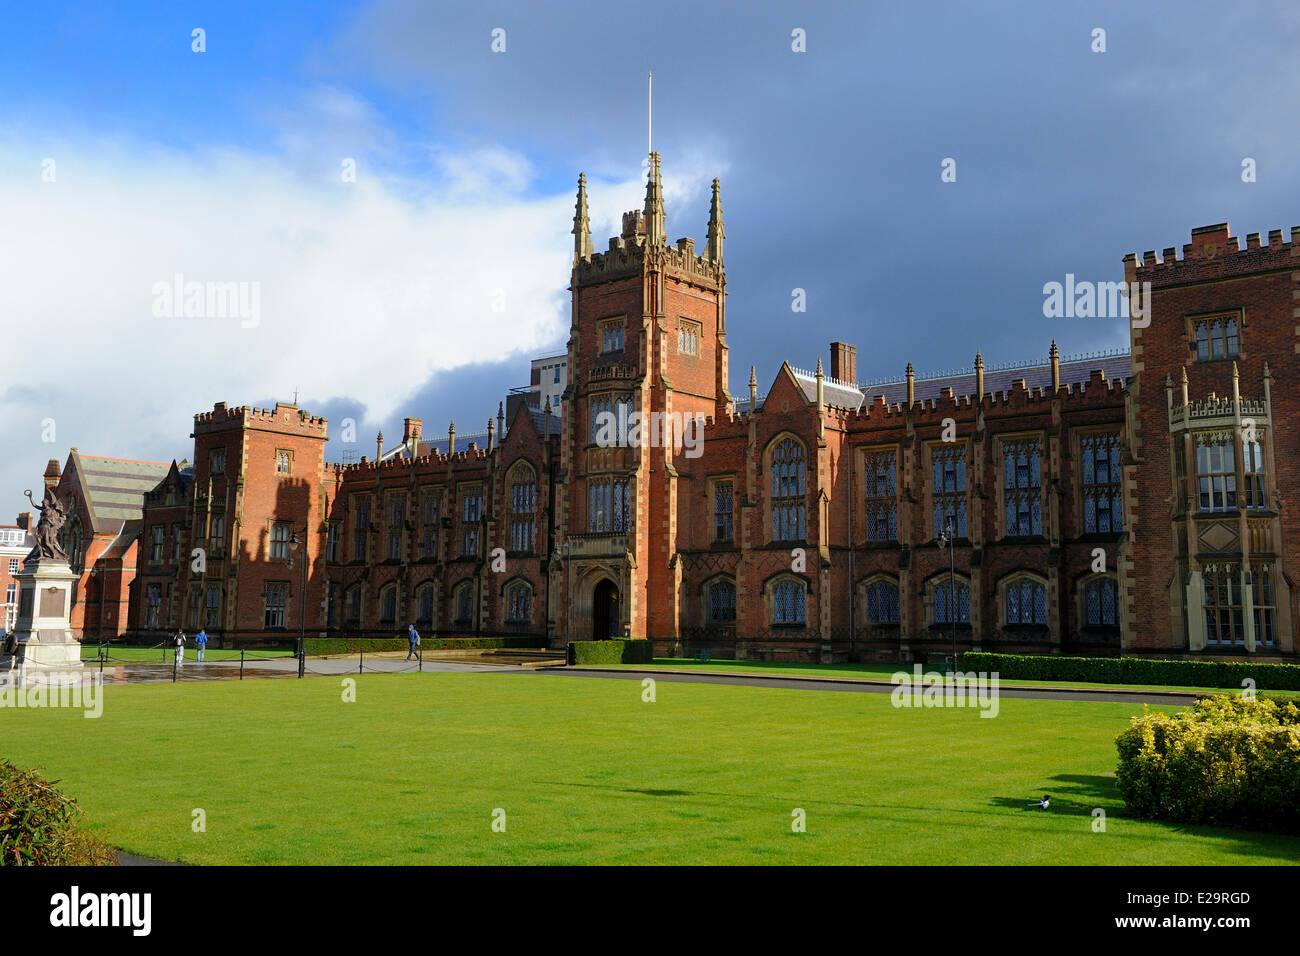 United Kingdom, Northern Ireland, Belfast, the building of Queen's University of Tudor architectural style Stock Photo